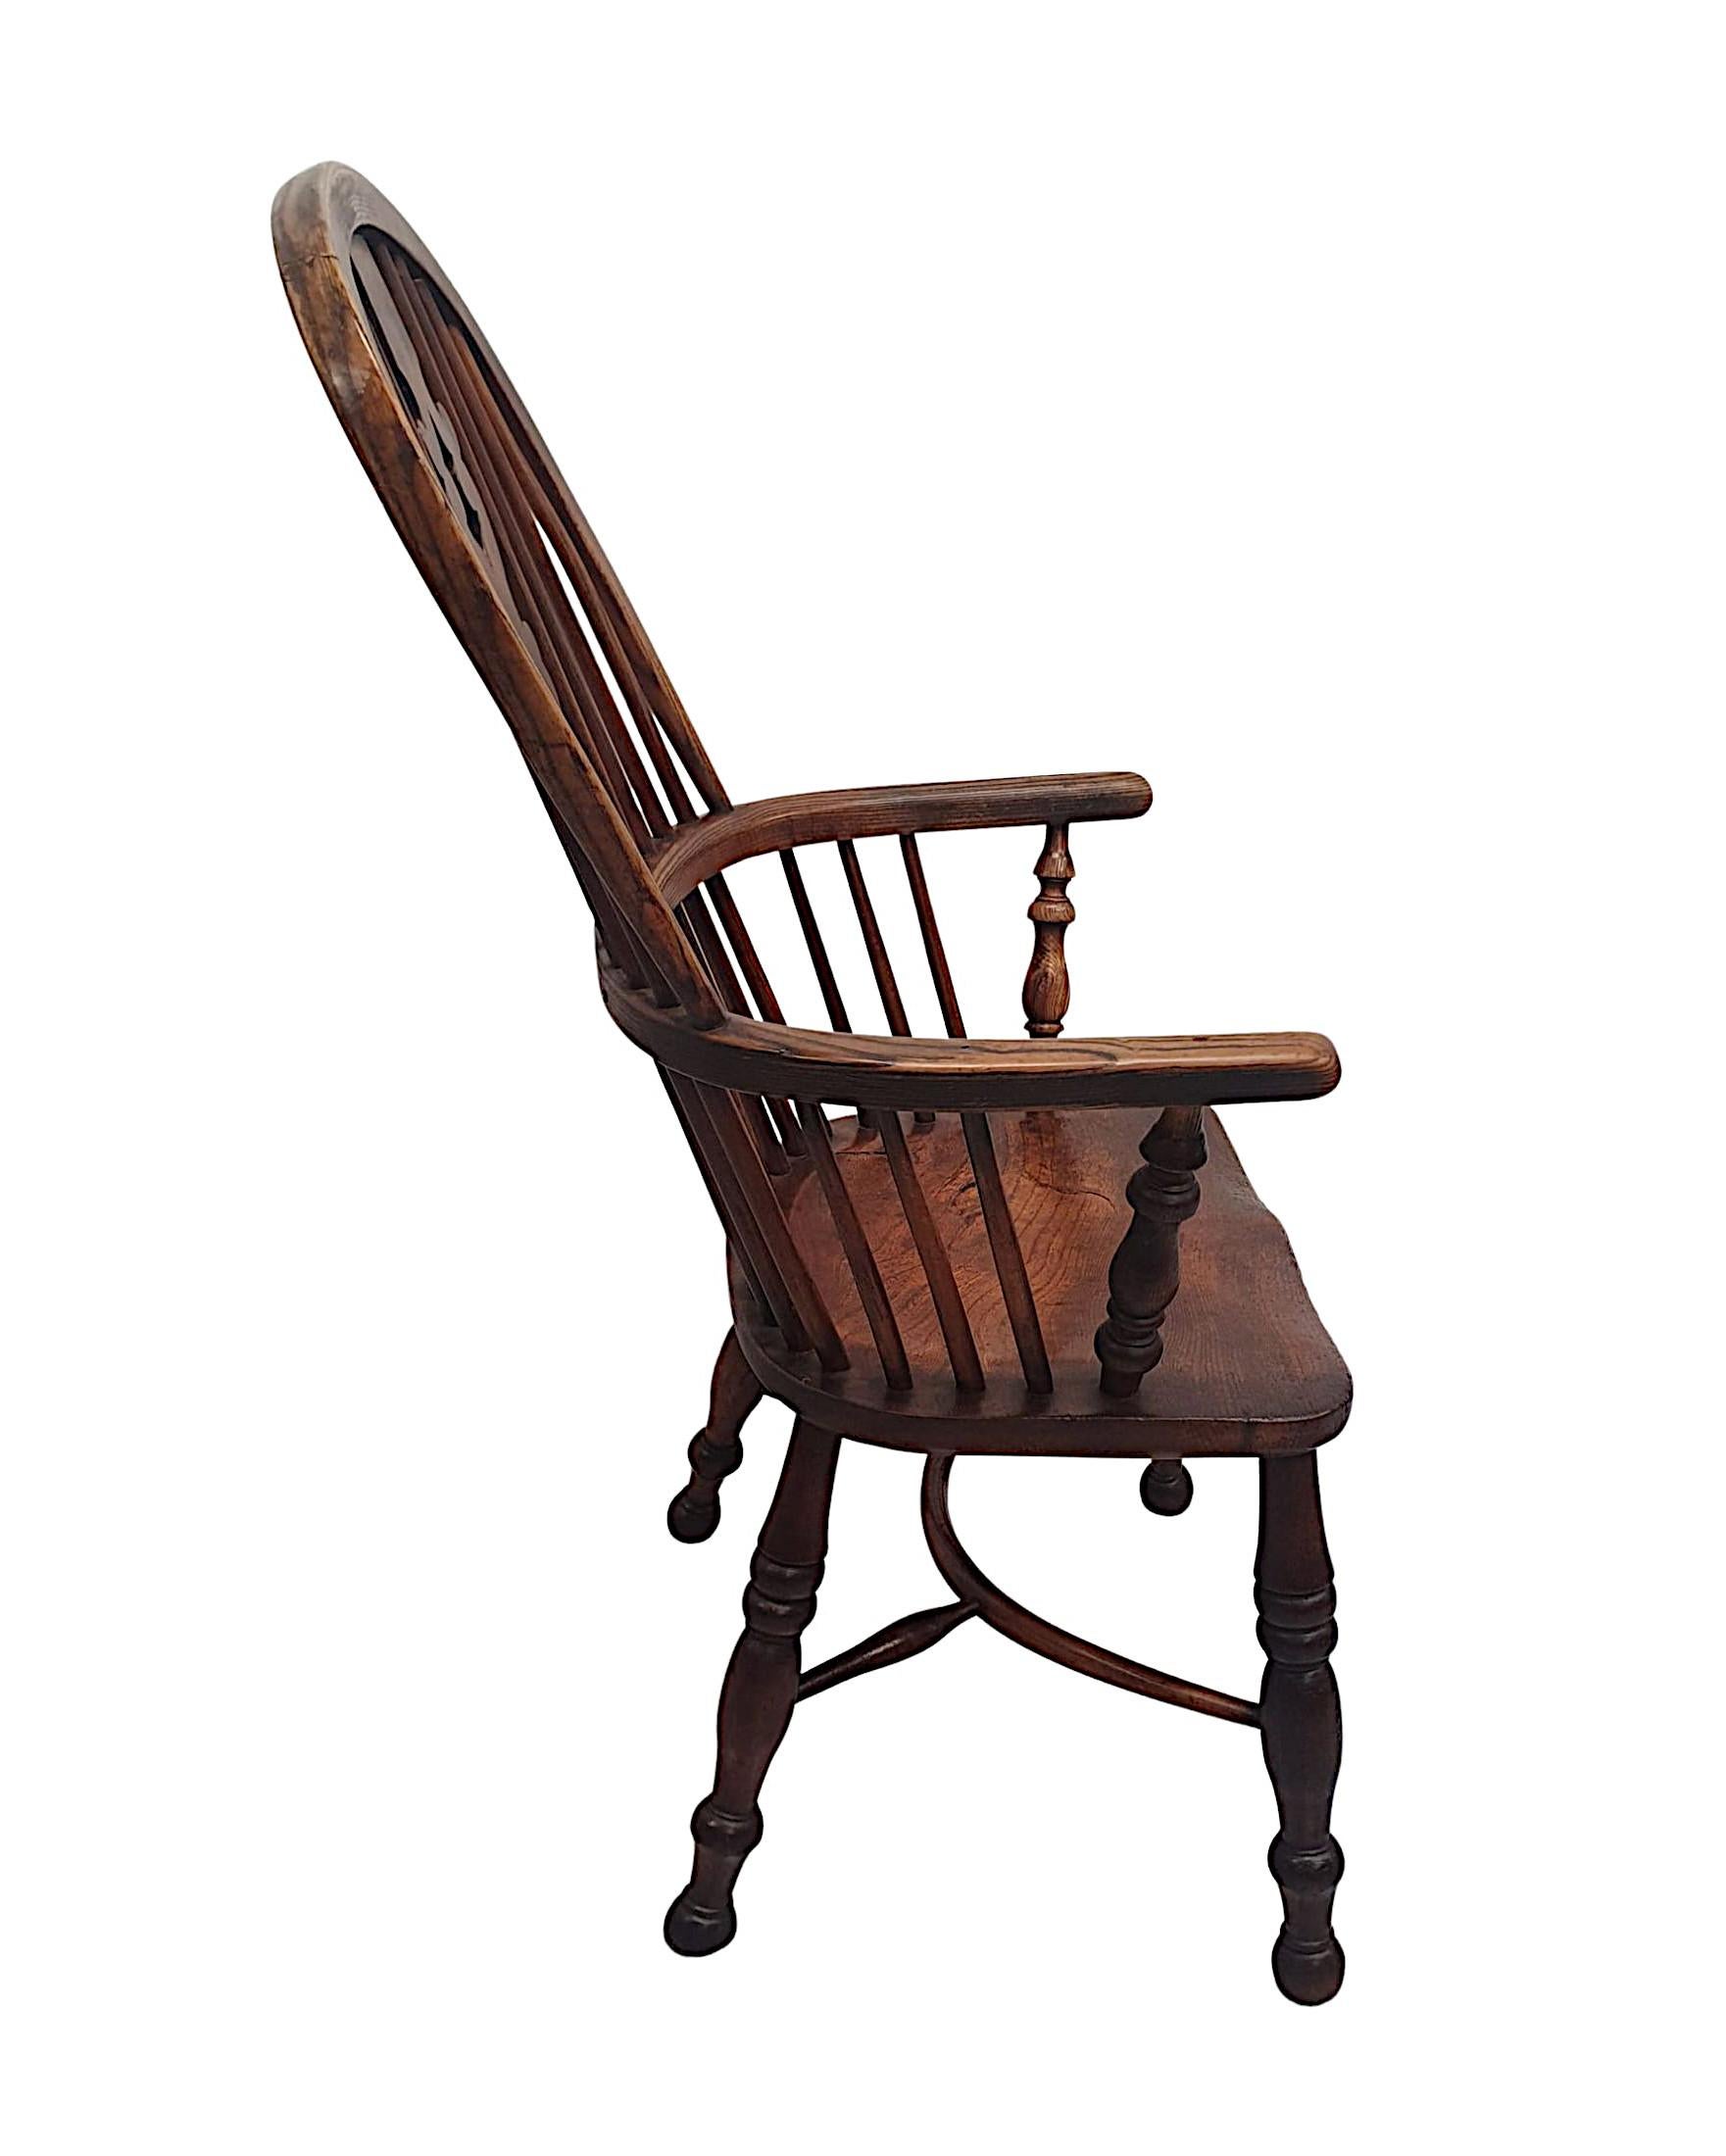 A very rare and fine 19th century Windsor armchair, stunningly hand carved and of exceptional quality with richly patinated woods comprising of ash and elm. The high hoop back with shaped, central fret cut back splat with decorative scroll motif